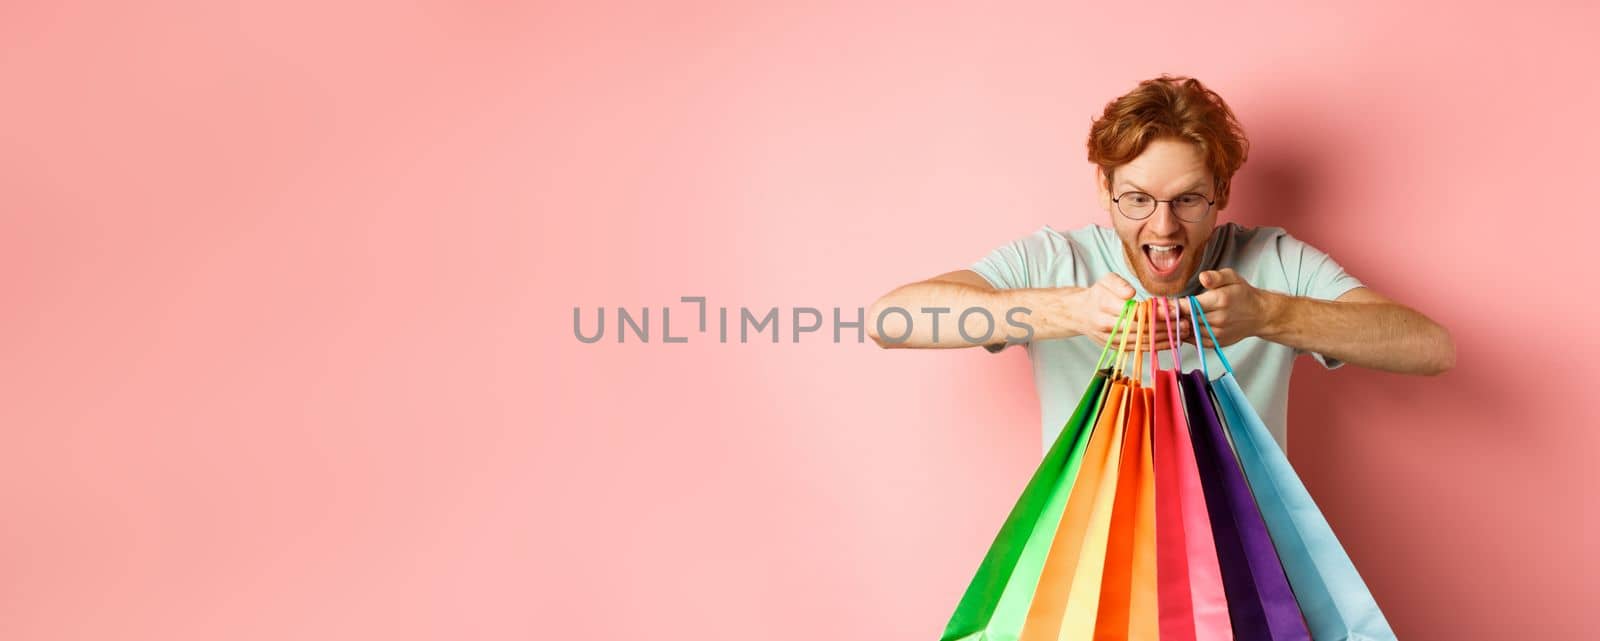 Excited young man, shopper holding shopping bags and smiling happy, looking excited at purchased items, standing over pink background.